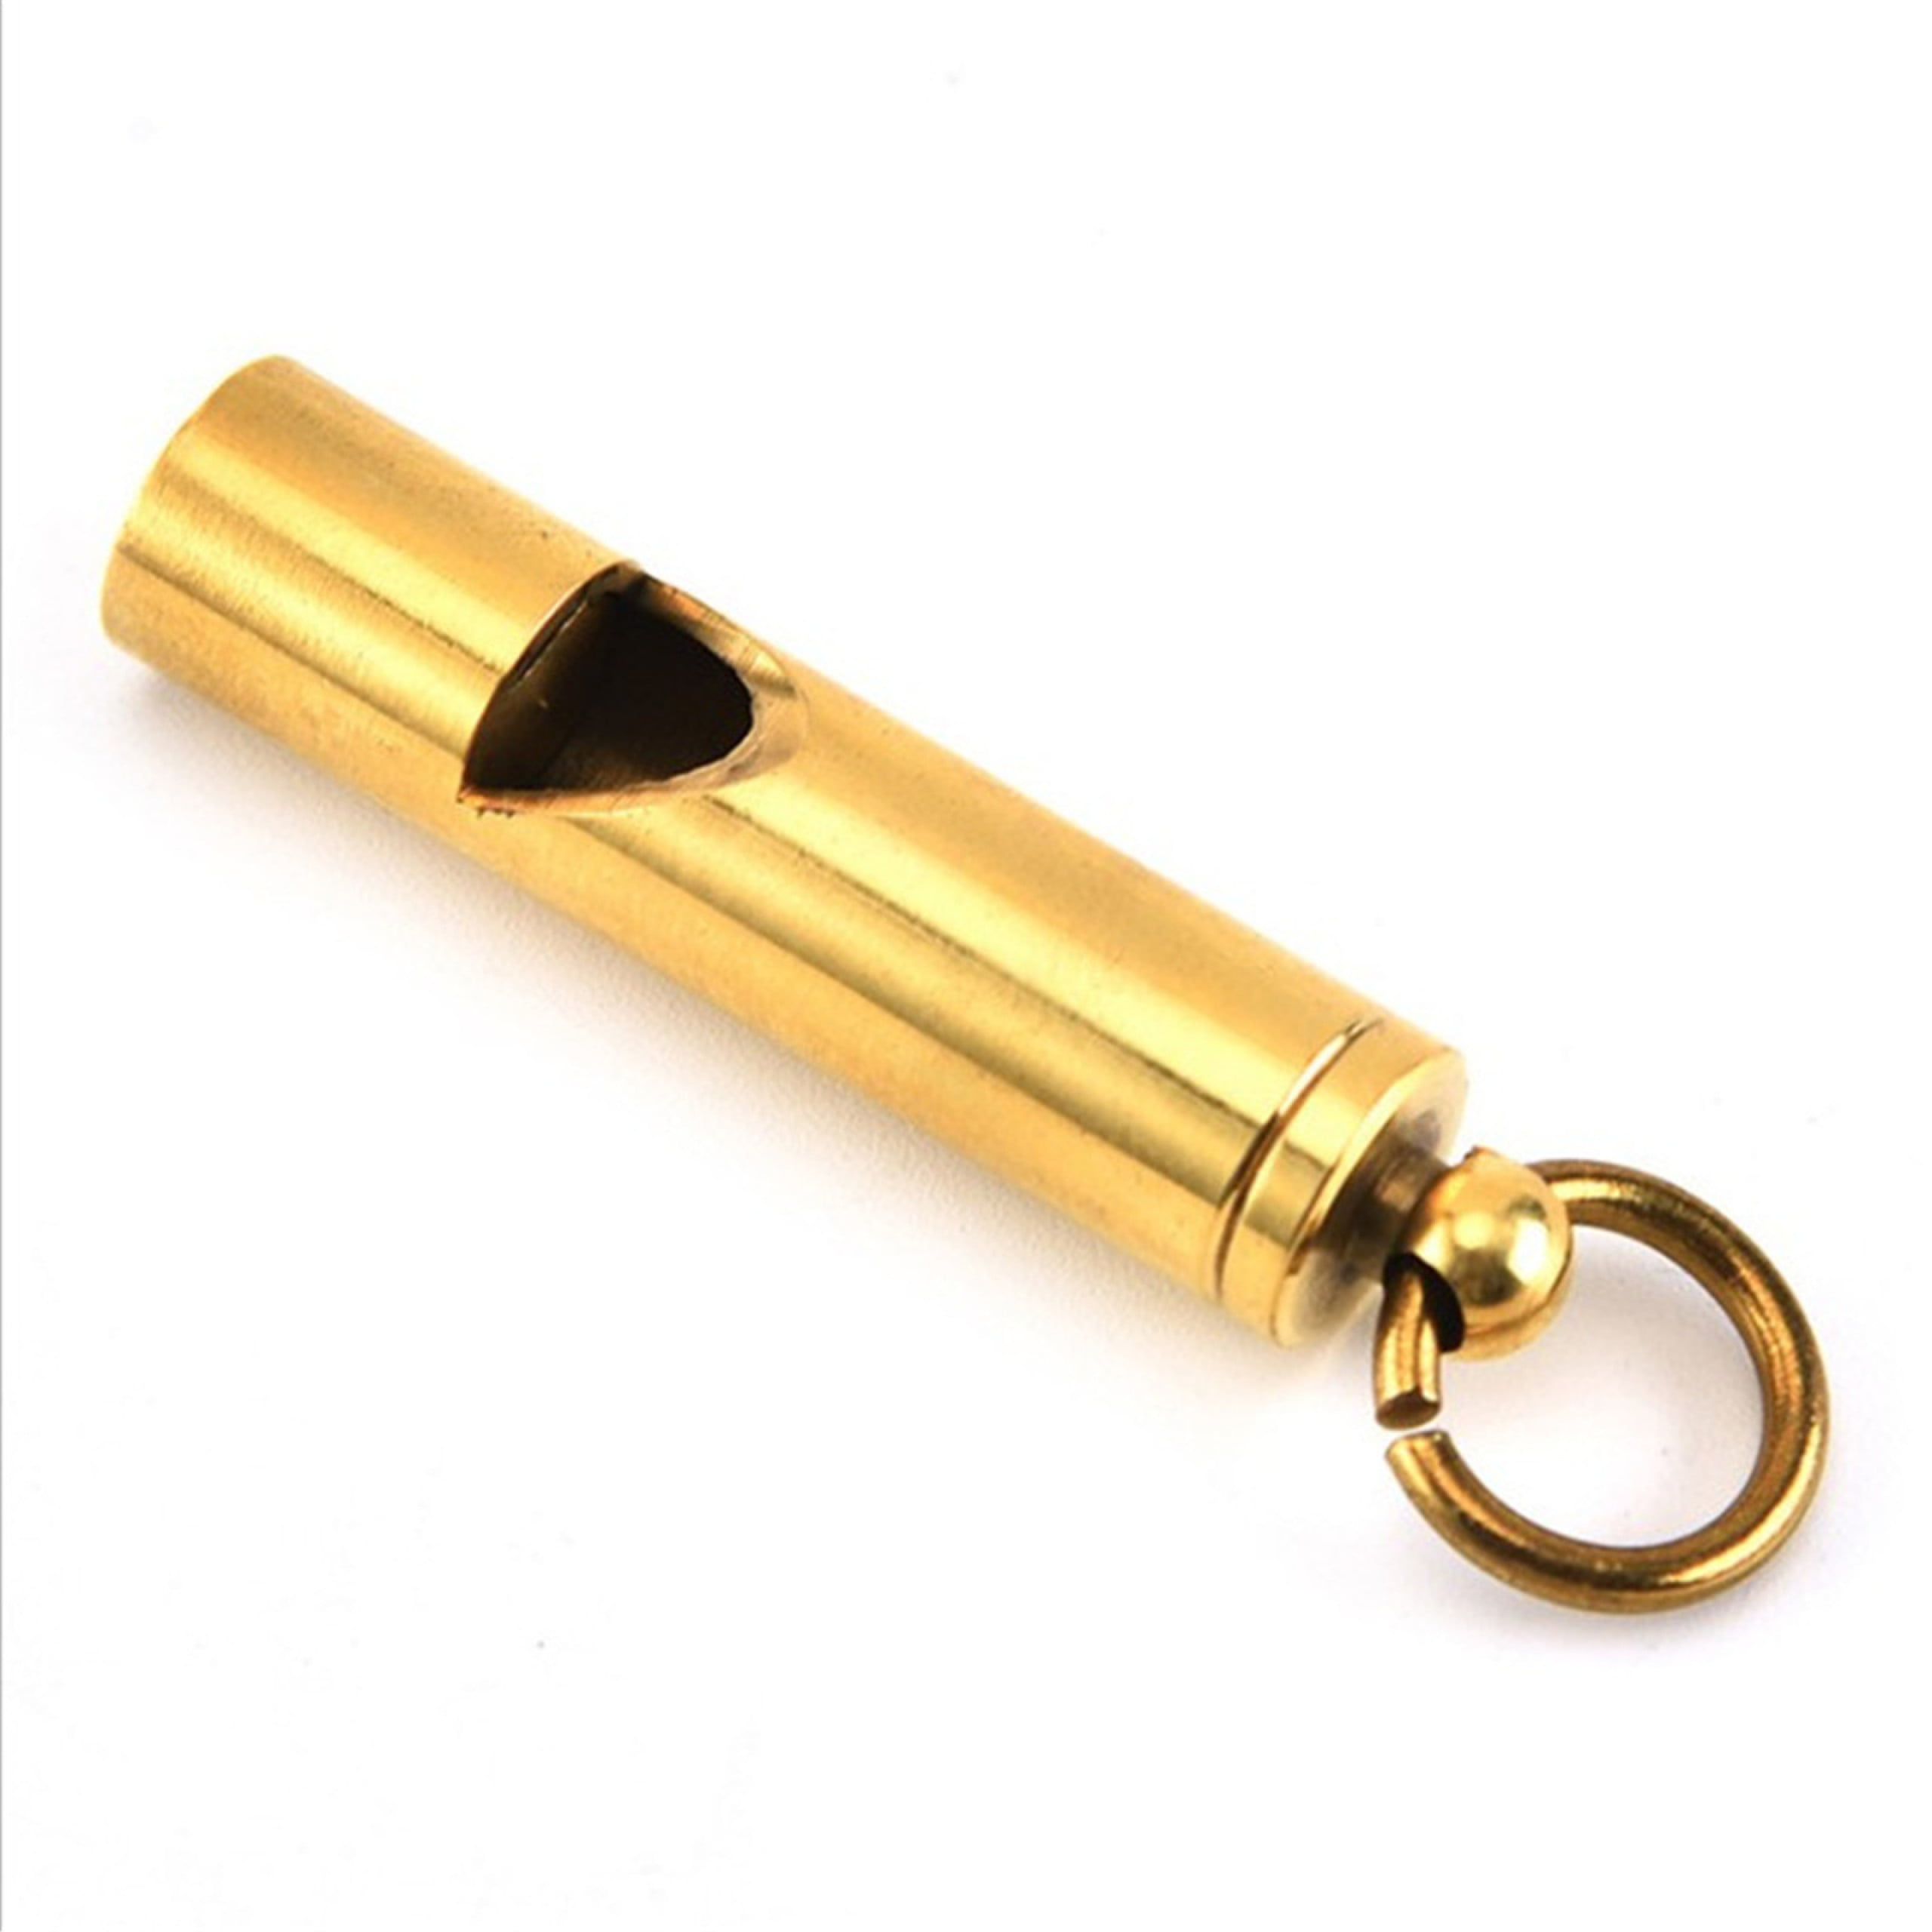 Loudest Brass Whistle Emergency Outdoor Survival Whistle Key-Chain U8Q4 C6S3 